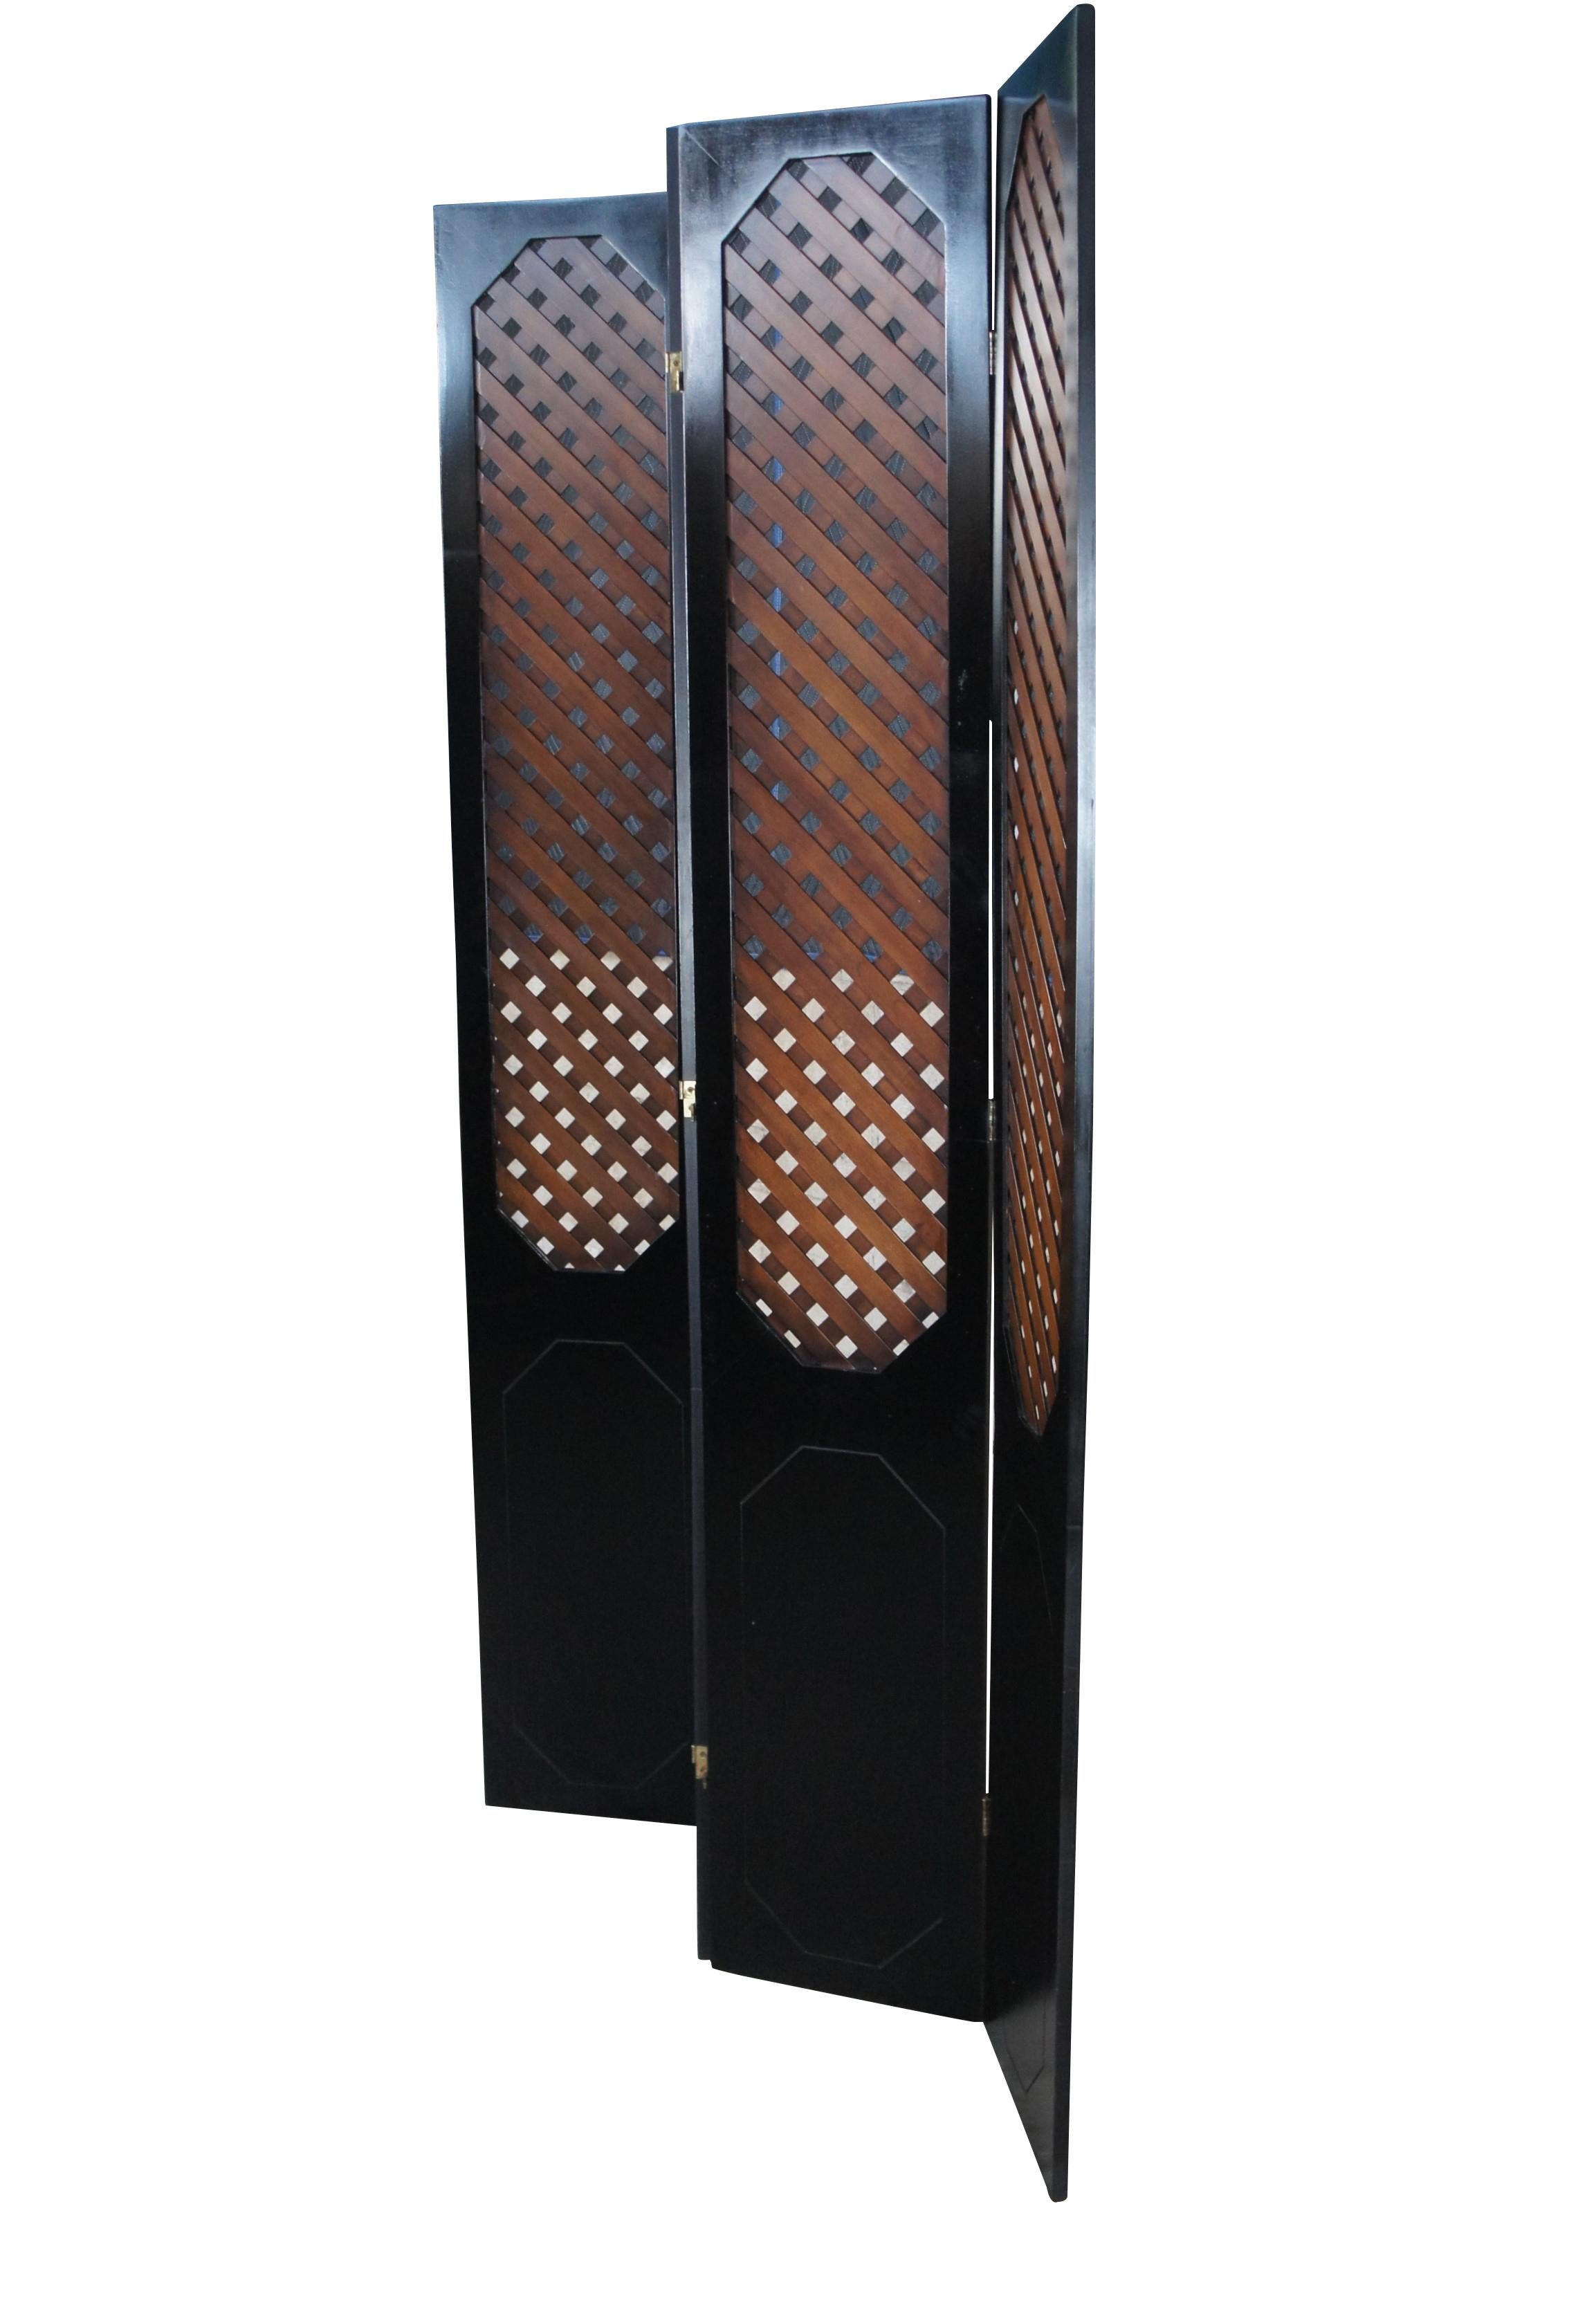 Vintage black painted folding room divider screen featuring four panels with wood lattice design. 

Dimensions:
90.h